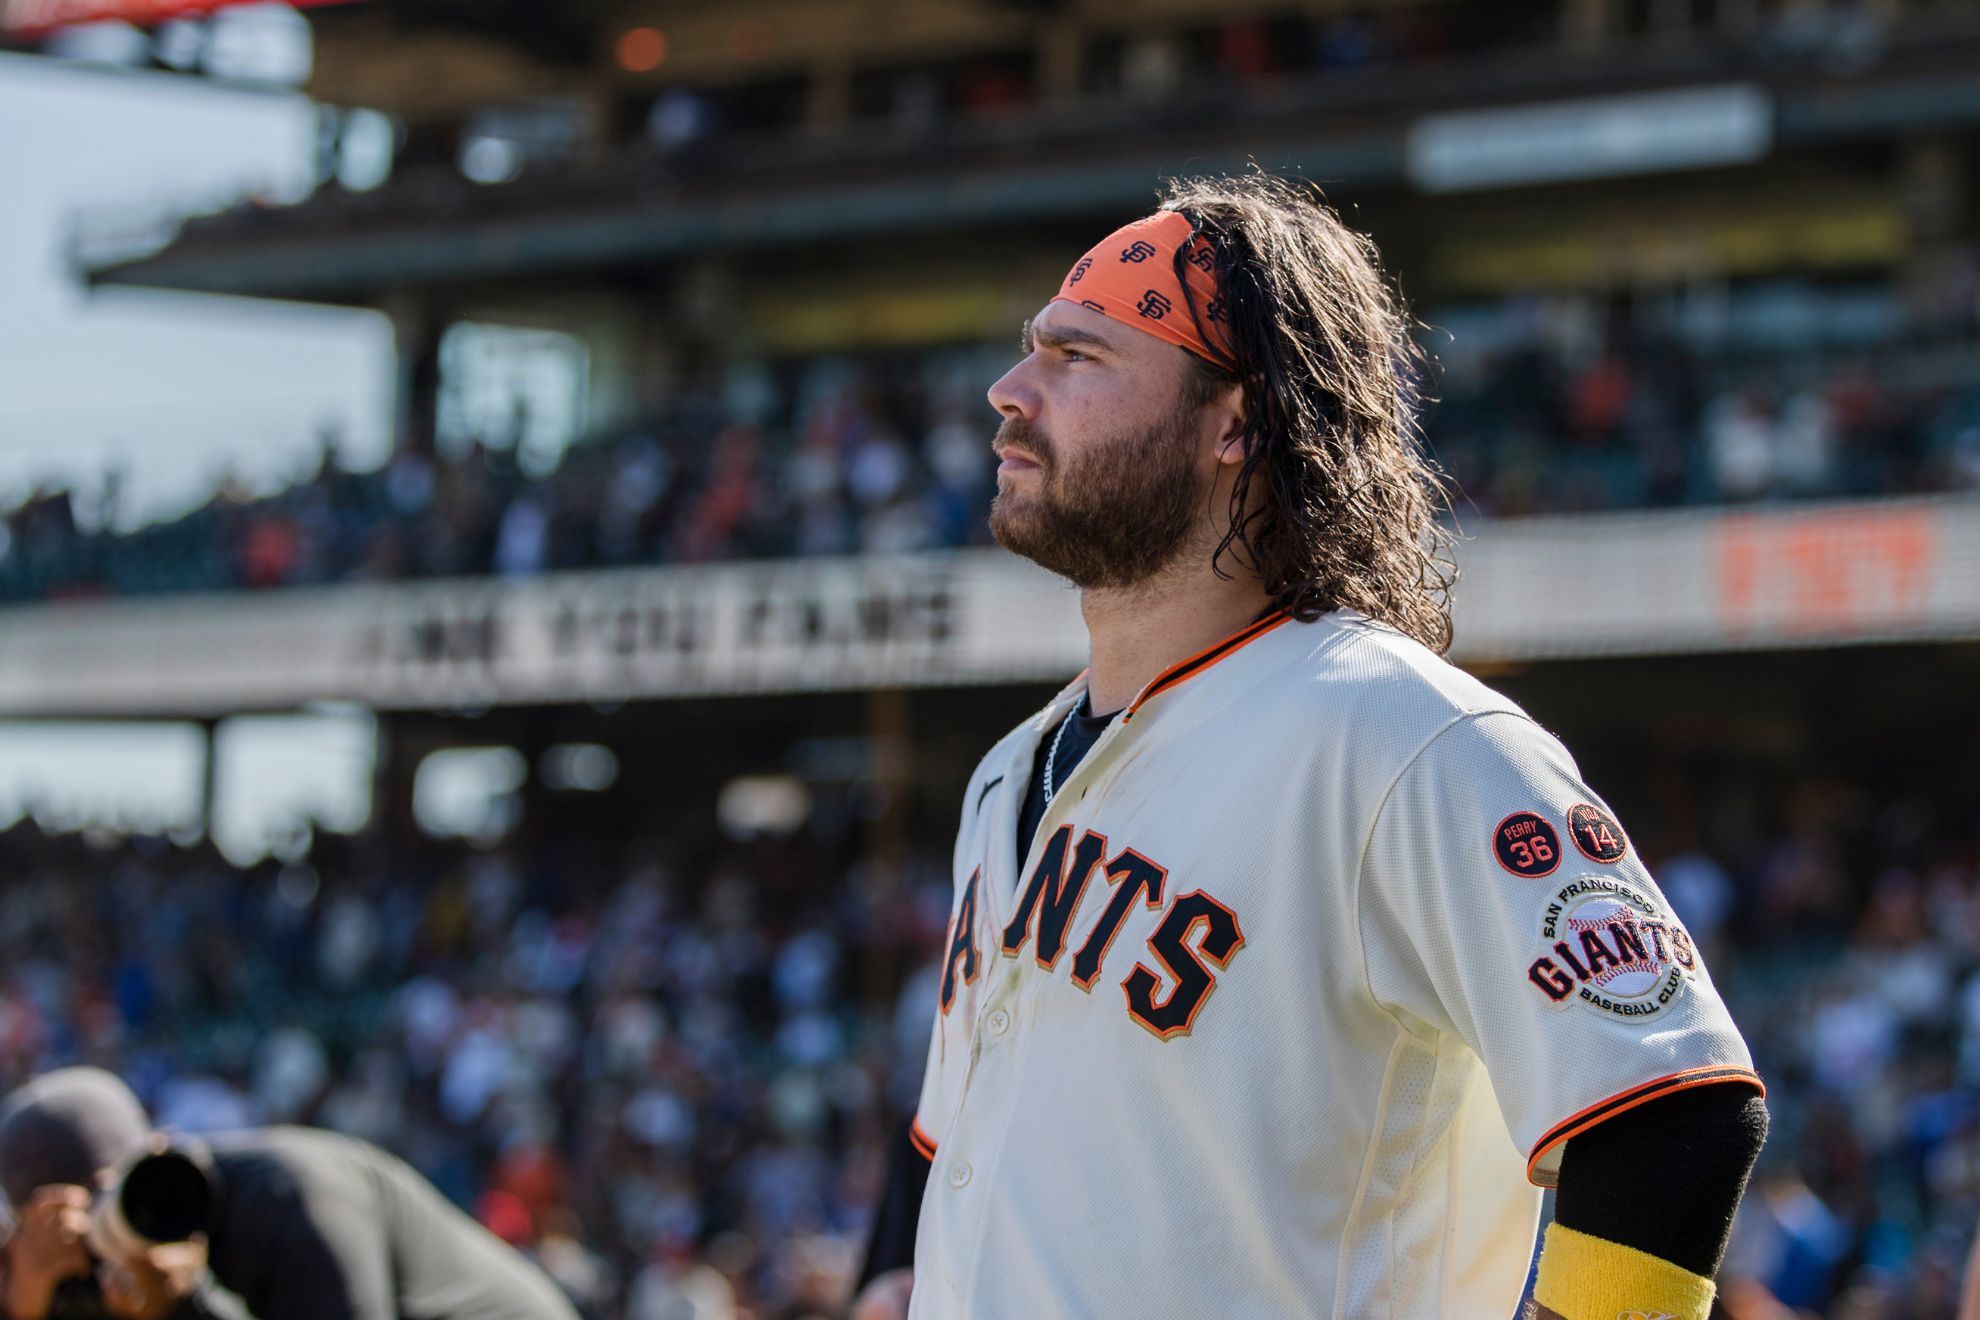 Brandon Crawford, long-time Giants shortstop and beloved figure, reportedly signed with the Cardinals